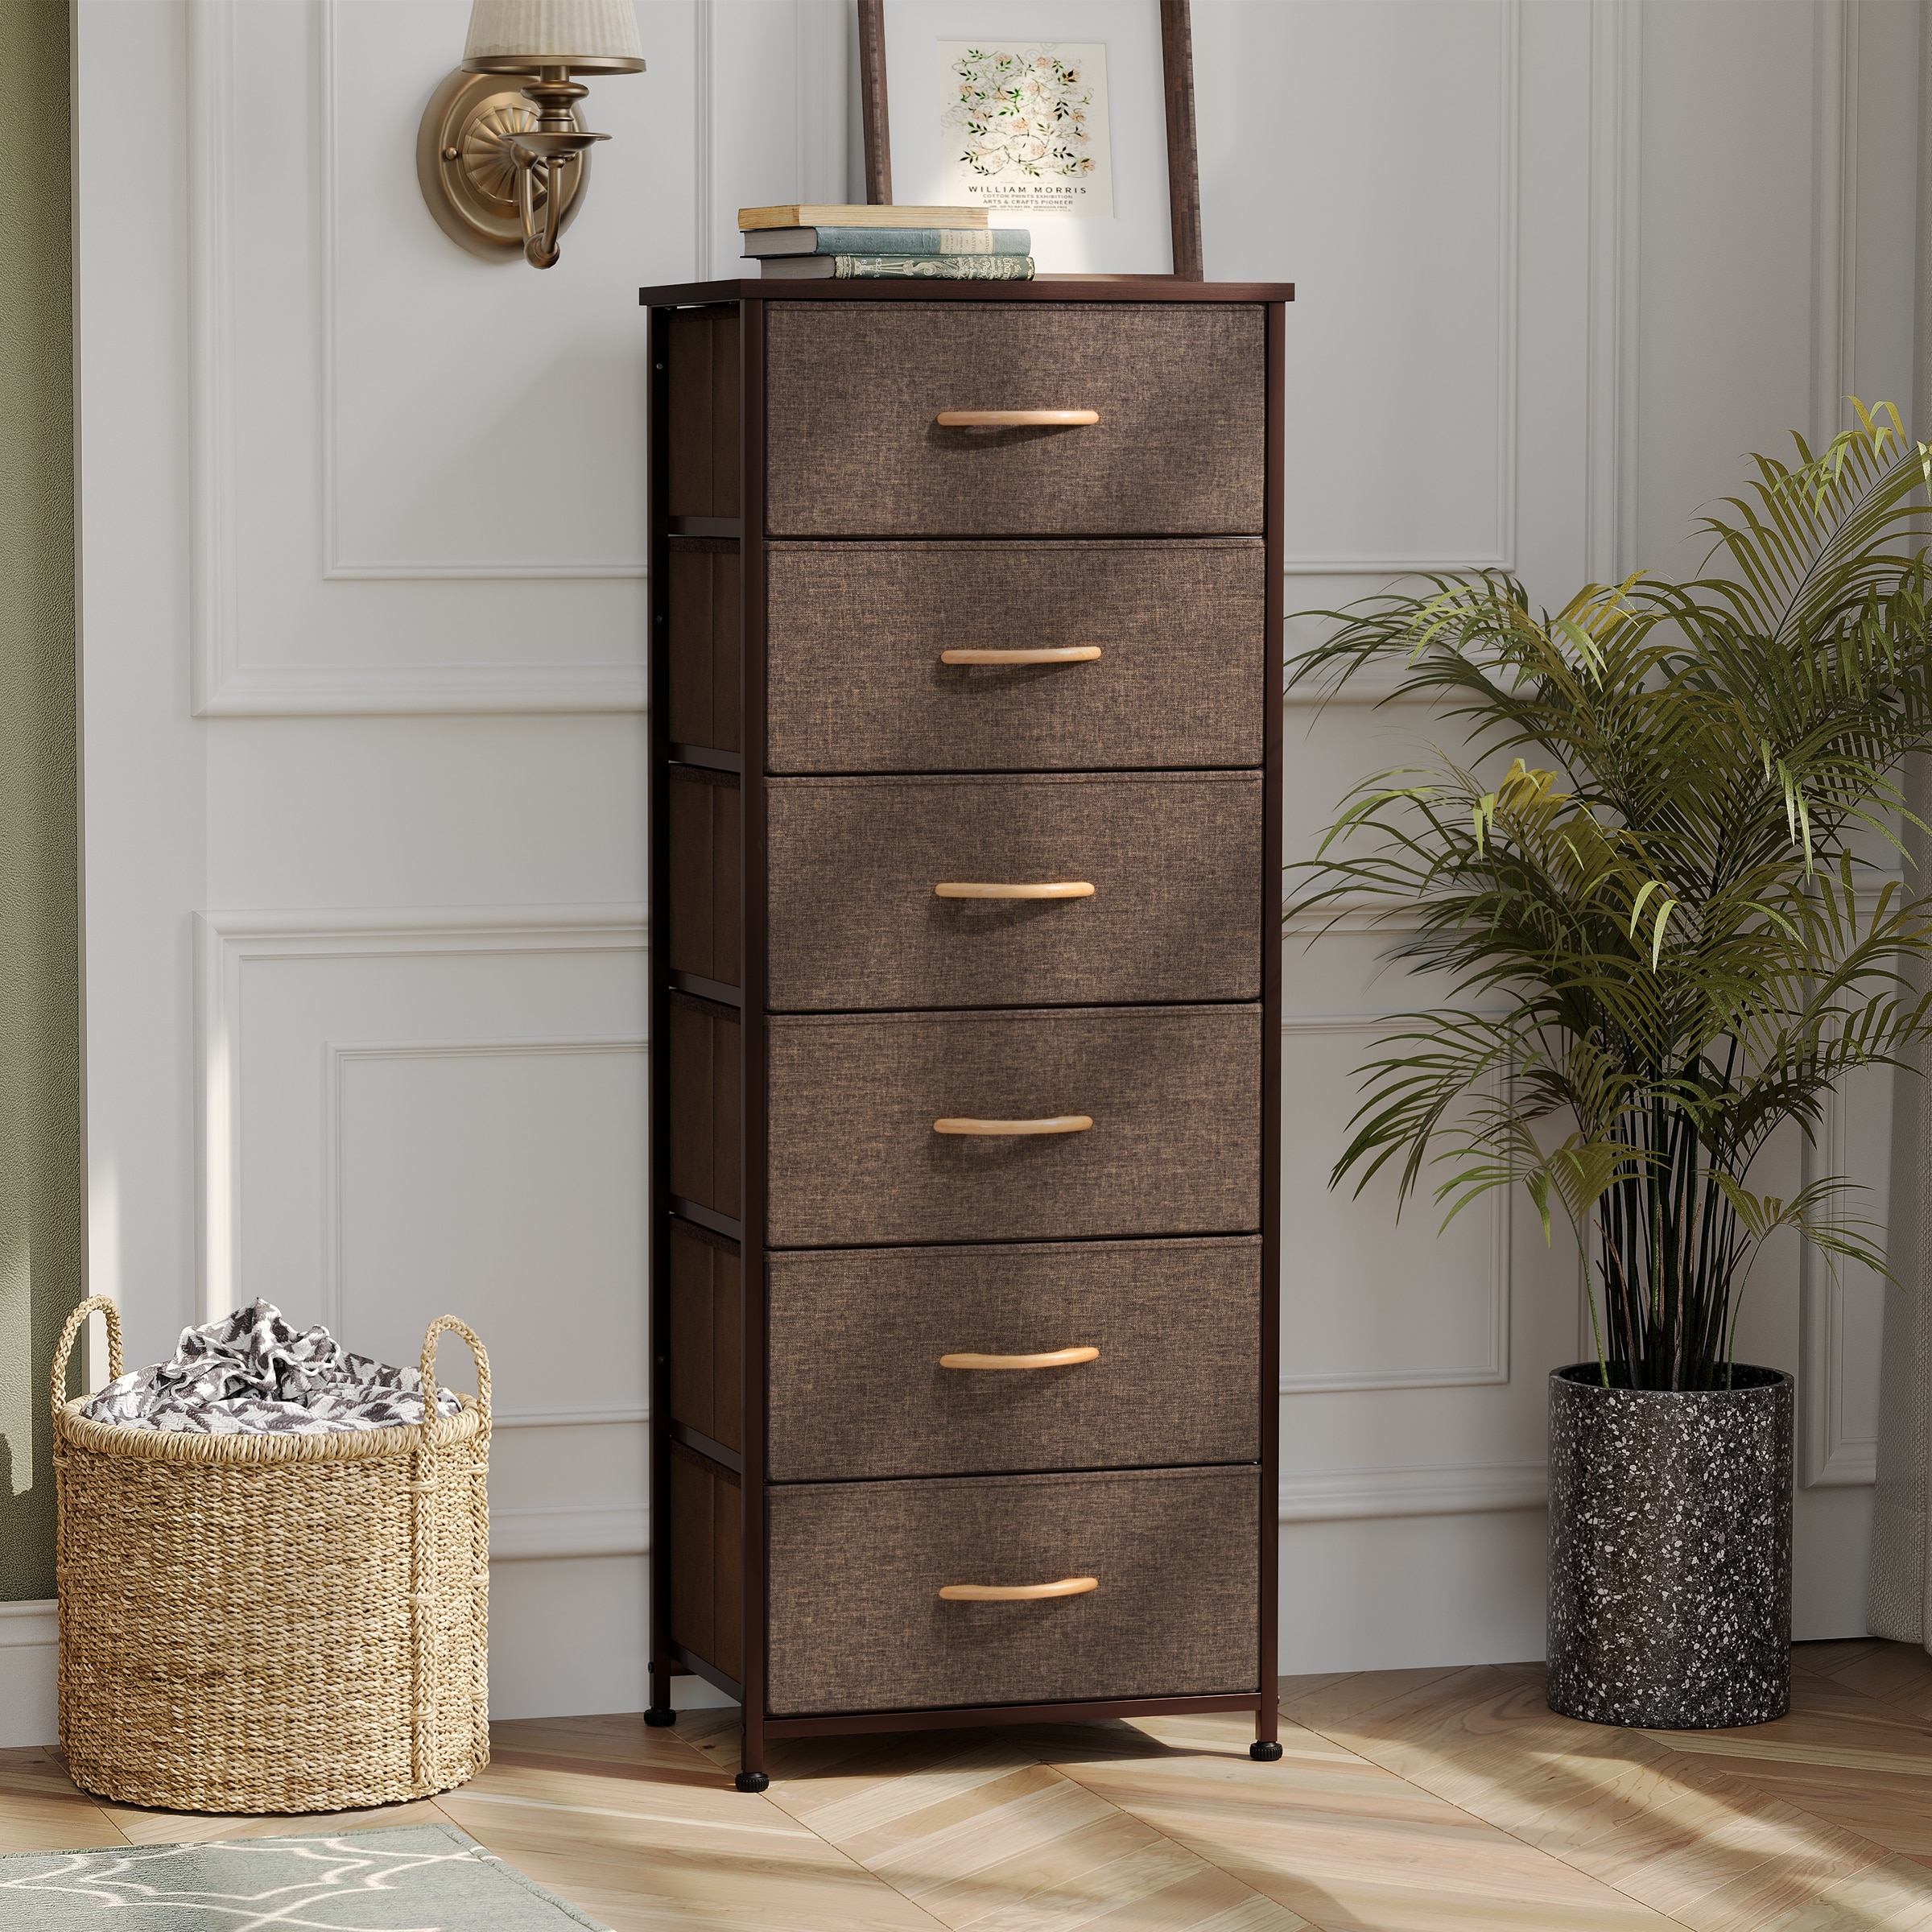 https://ak1.ostkcdn.com/images/products/is/images/direct/a0d8d35e49dd8a36f8989c84484e697e70e3ec30/Pellebant-6-Drawers-Vertical-Storage-Tower.jpg